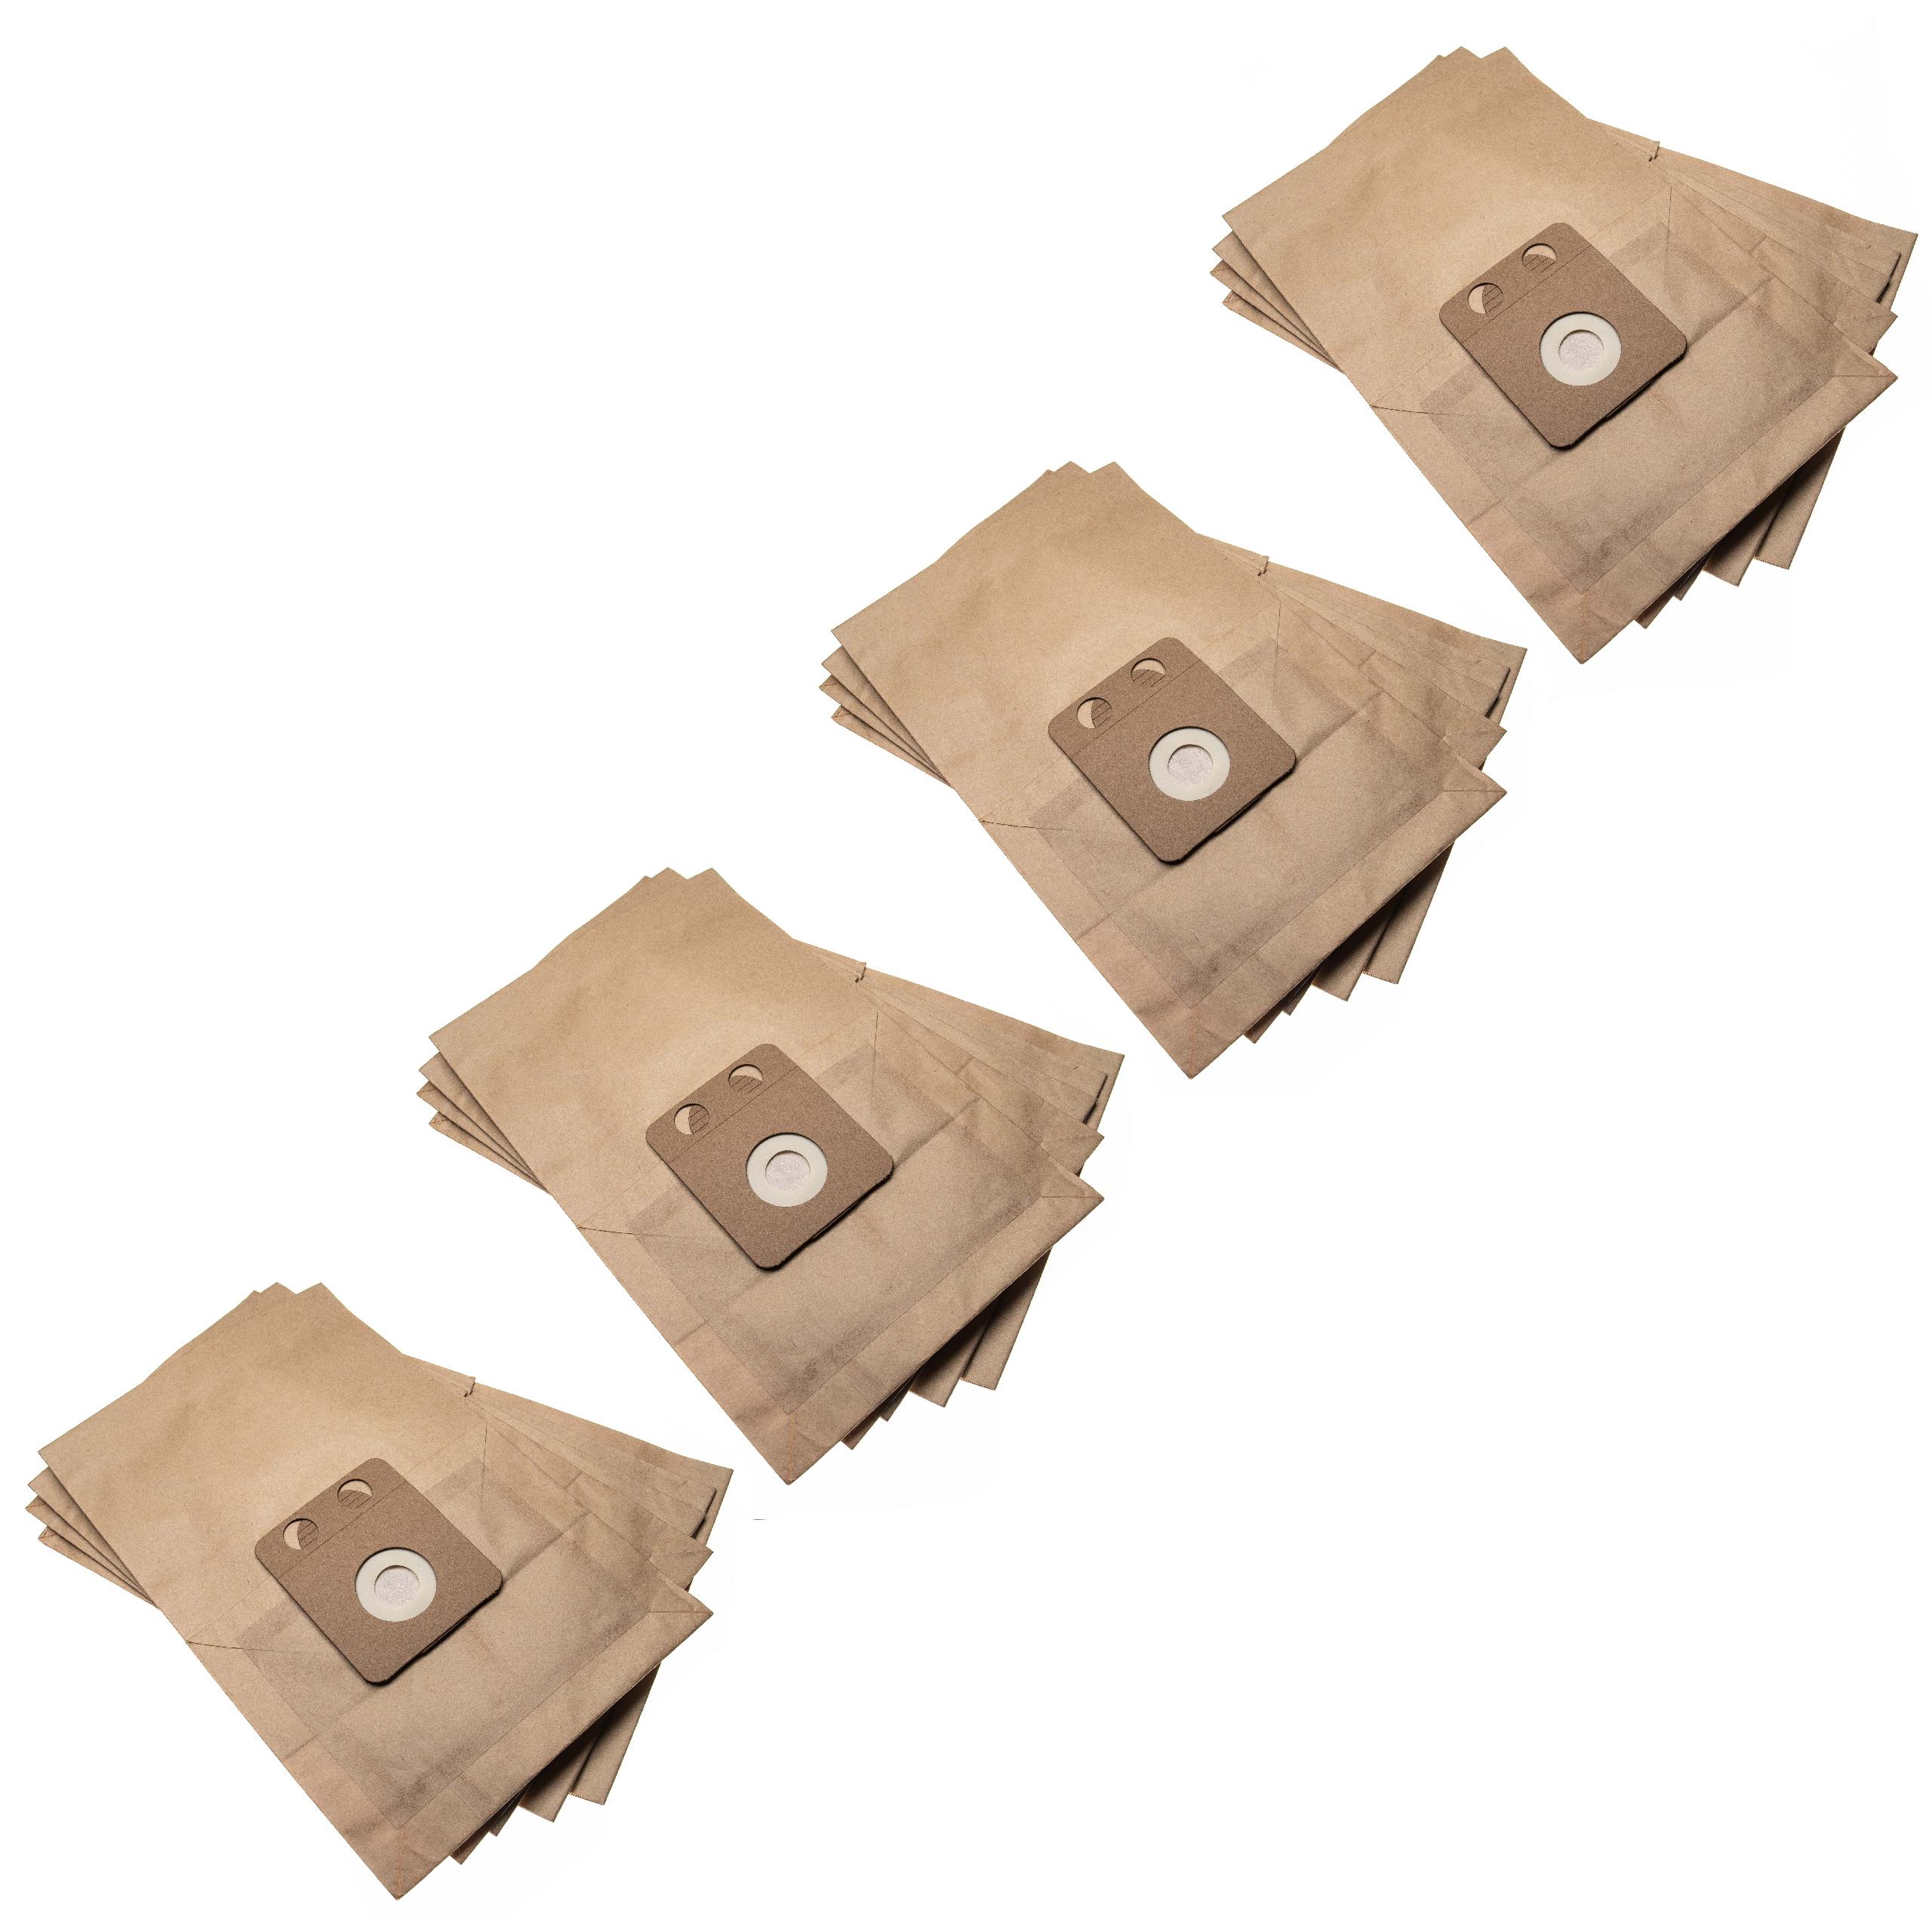 20x Vacuum Cleaner Bag replaces Nilfisk 107413077 for Nilfisk - paper